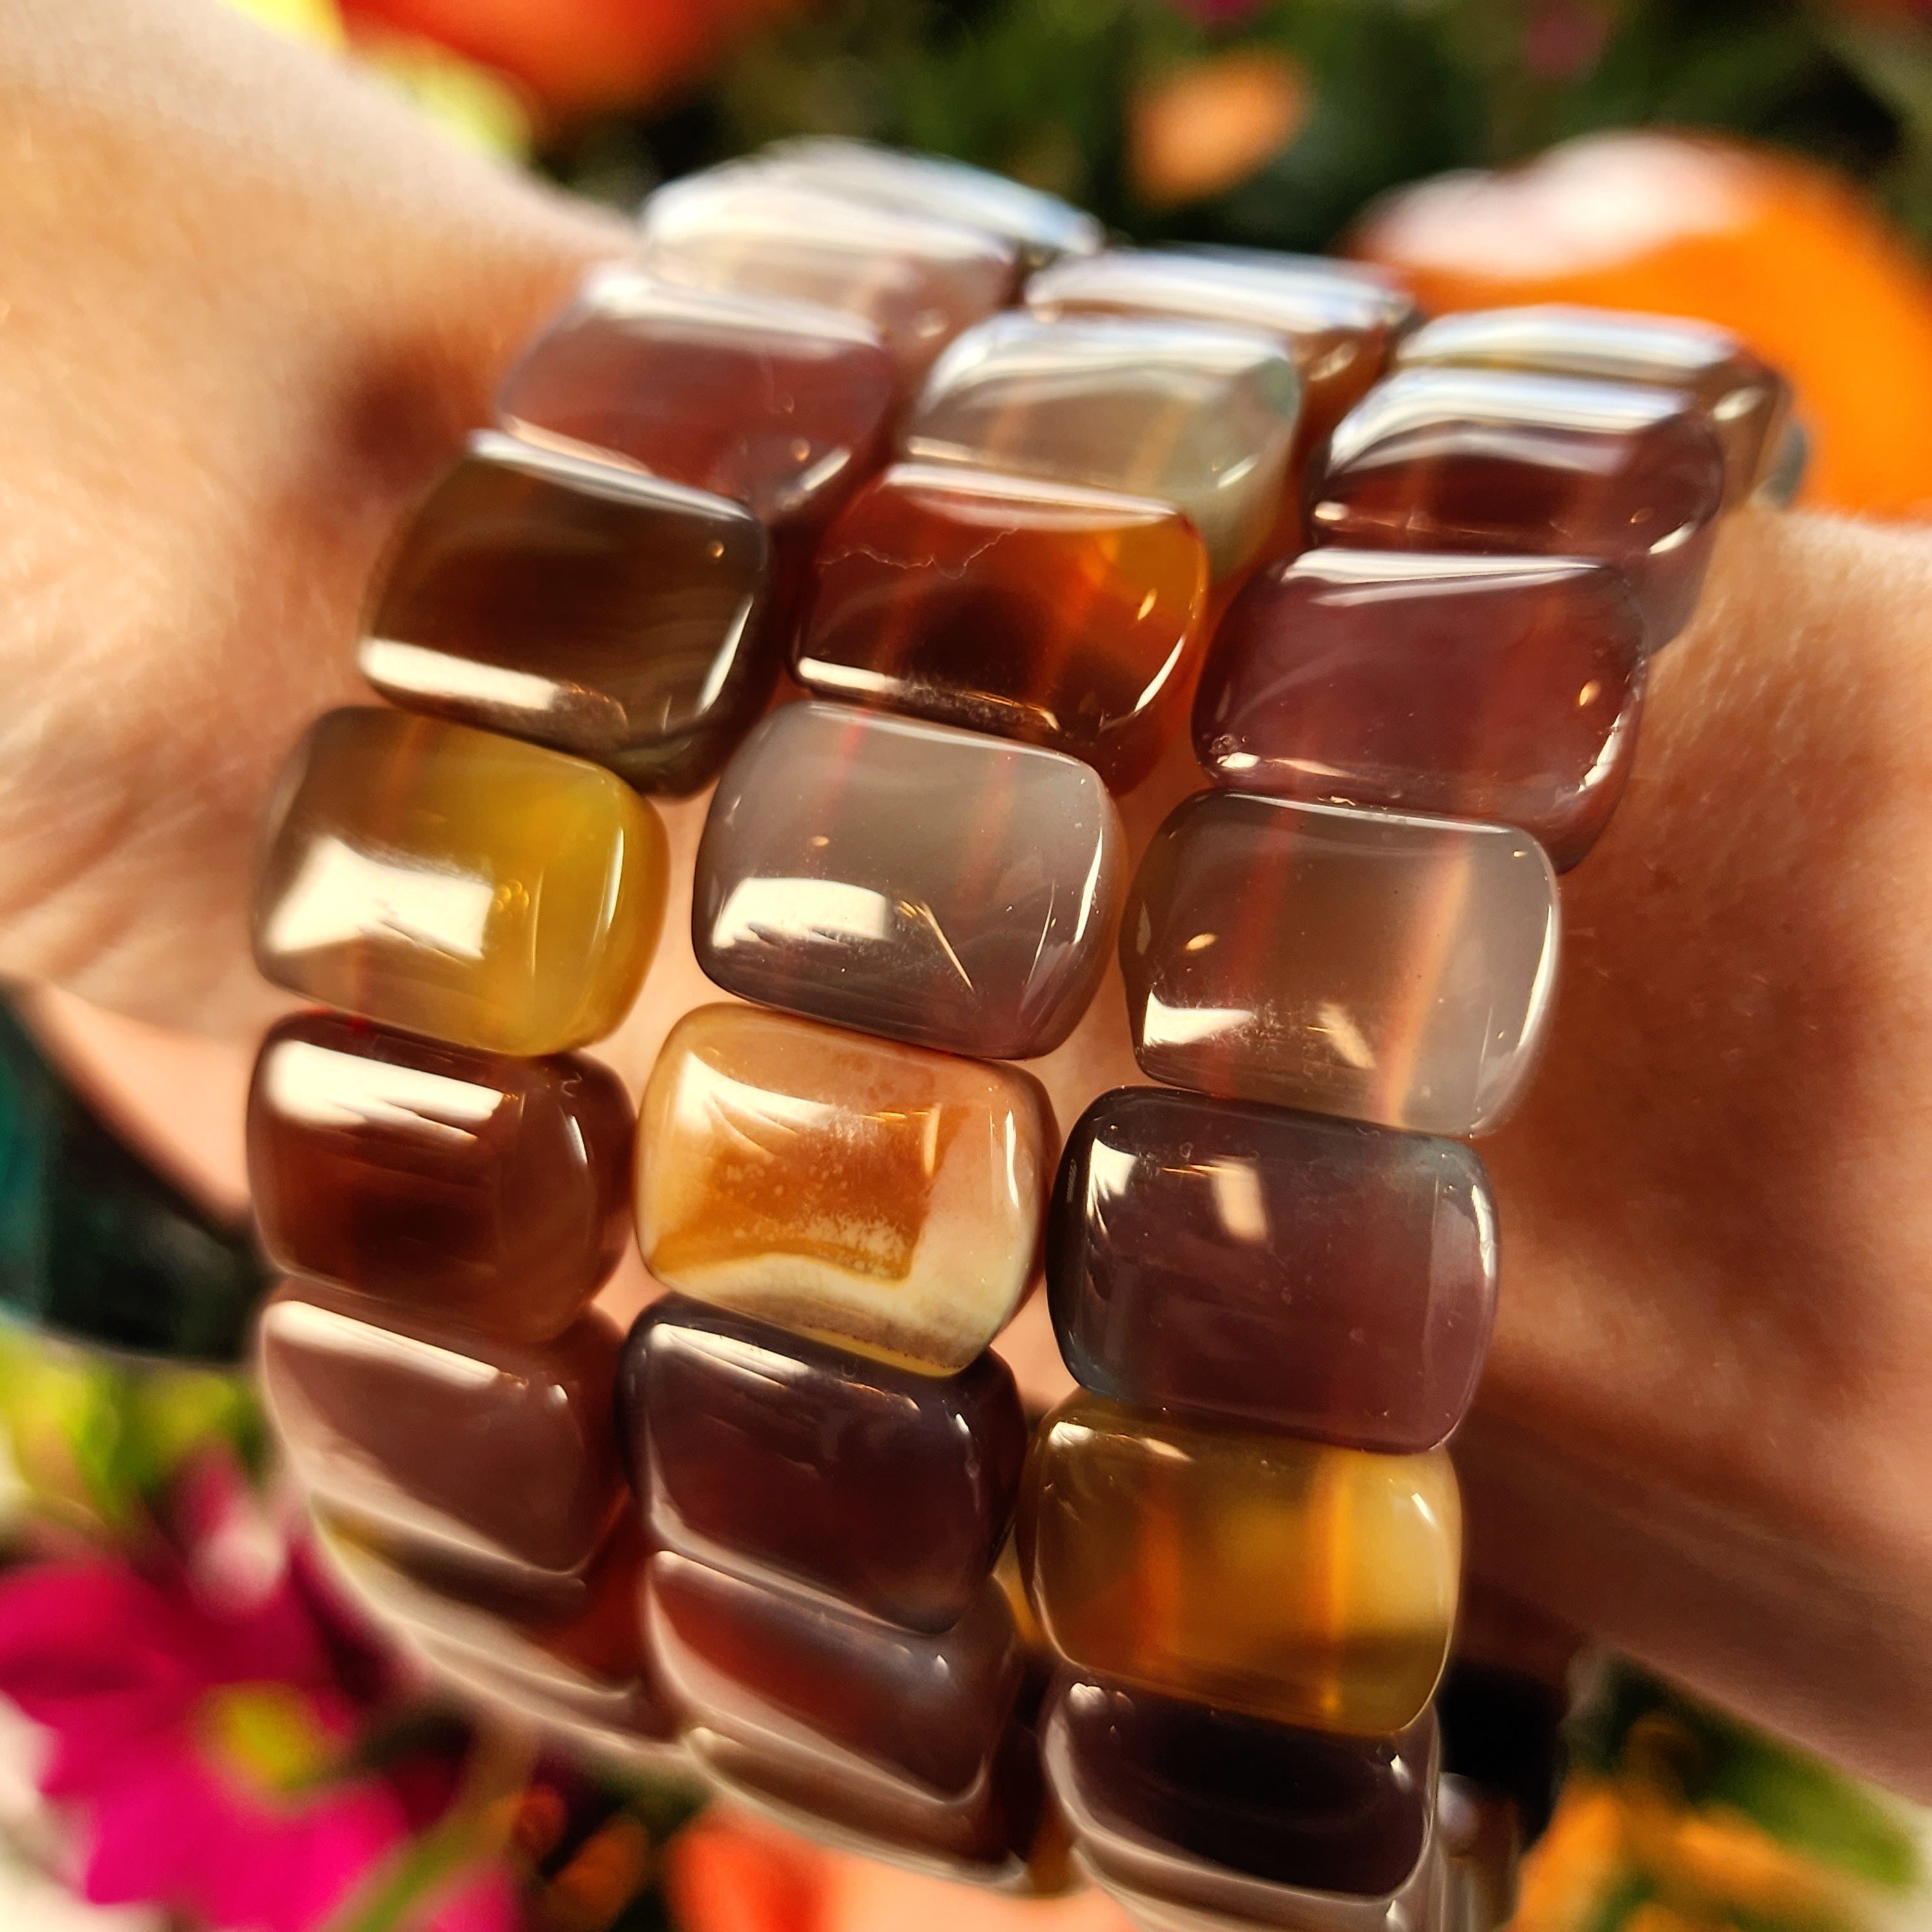 Yanyuan Agate Stretchy Bangle Bracelet for Achieving Goals, Confidence and Health